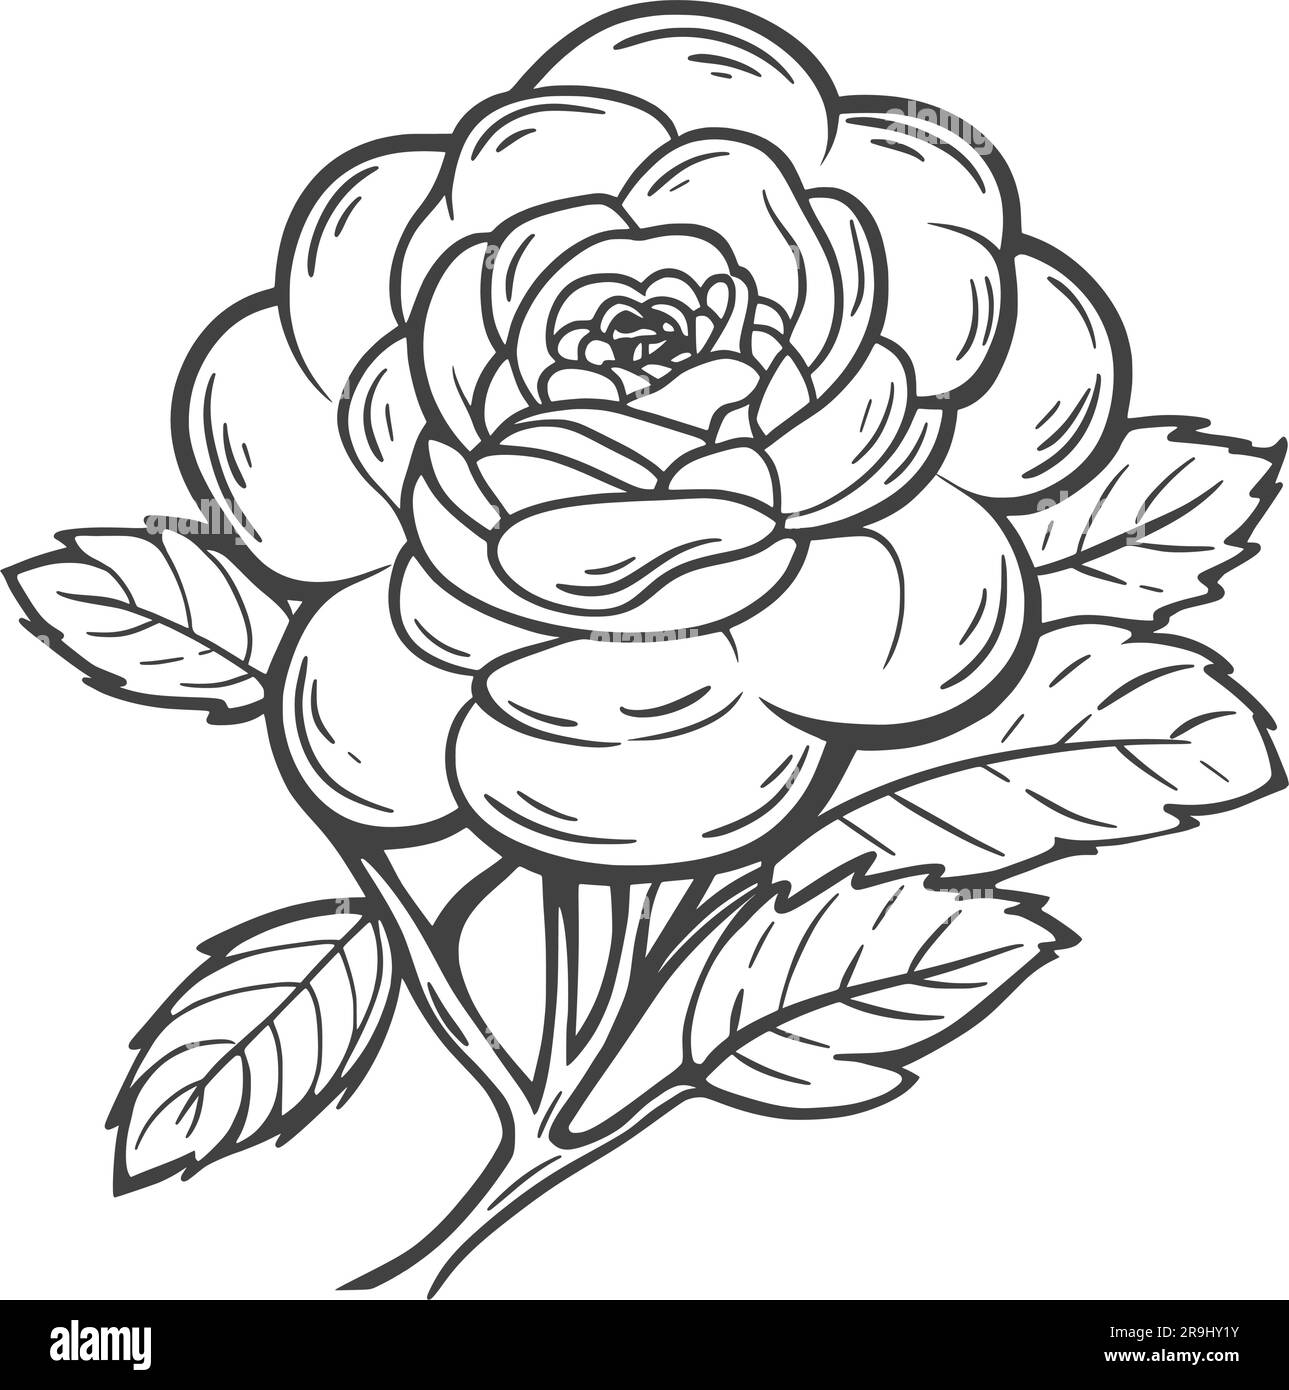 Lush peony flower ink sketch. Beautiful blossoming petals lonely rose. Hand drawn black sketch of blossom, isolated on white background, vector Stock Vector